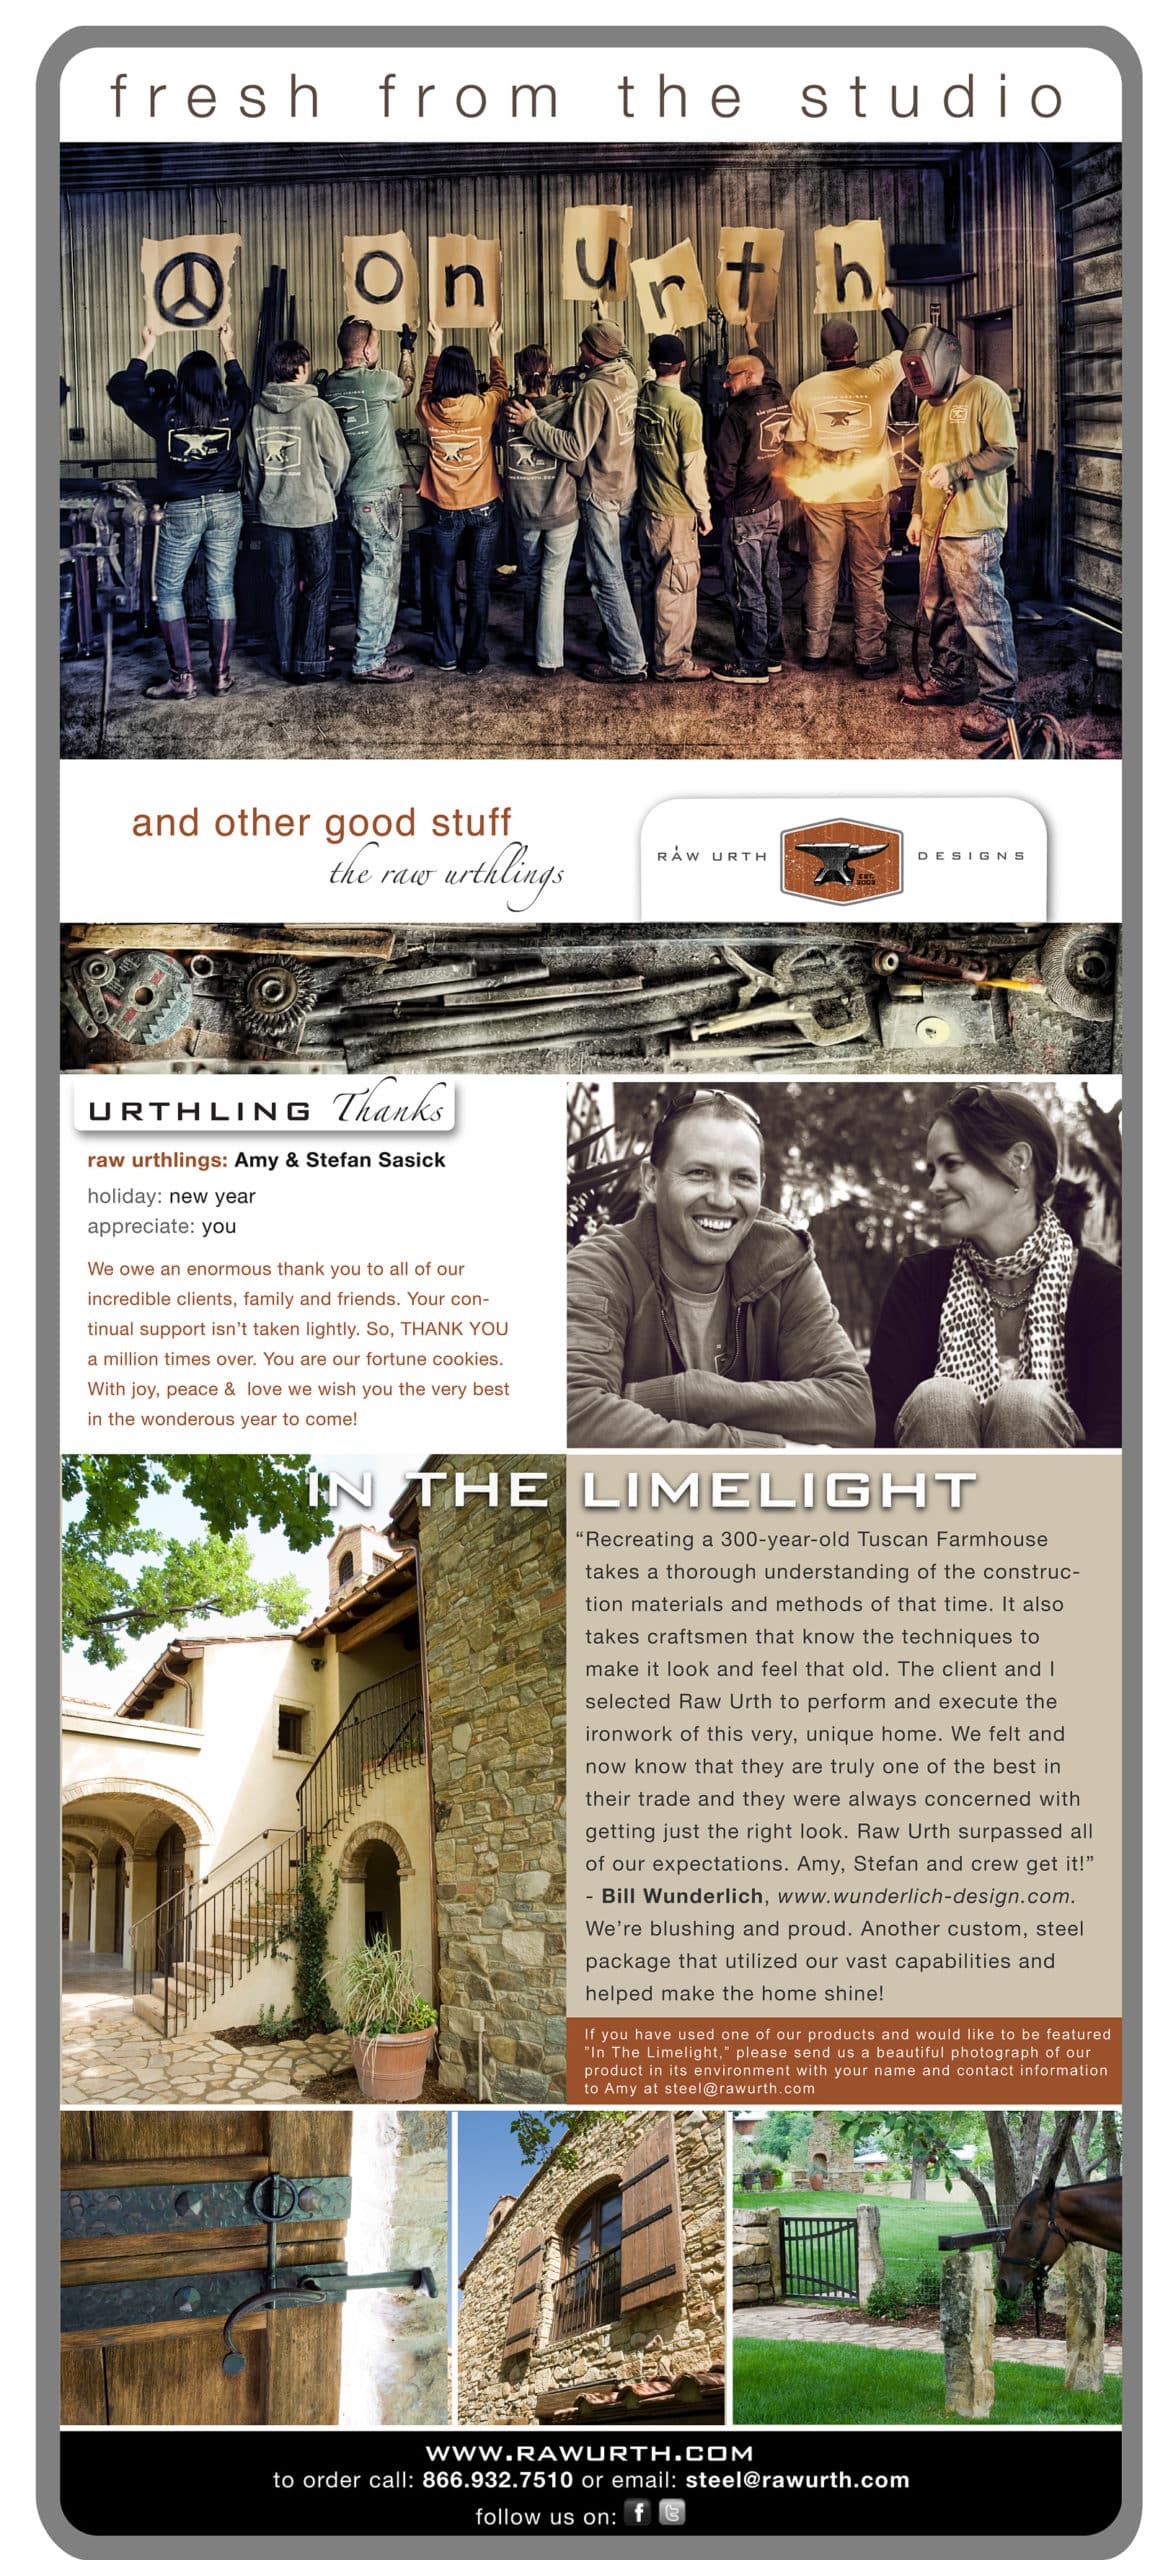 Fresh from the Studio, check out our Urthling news for the holidays!